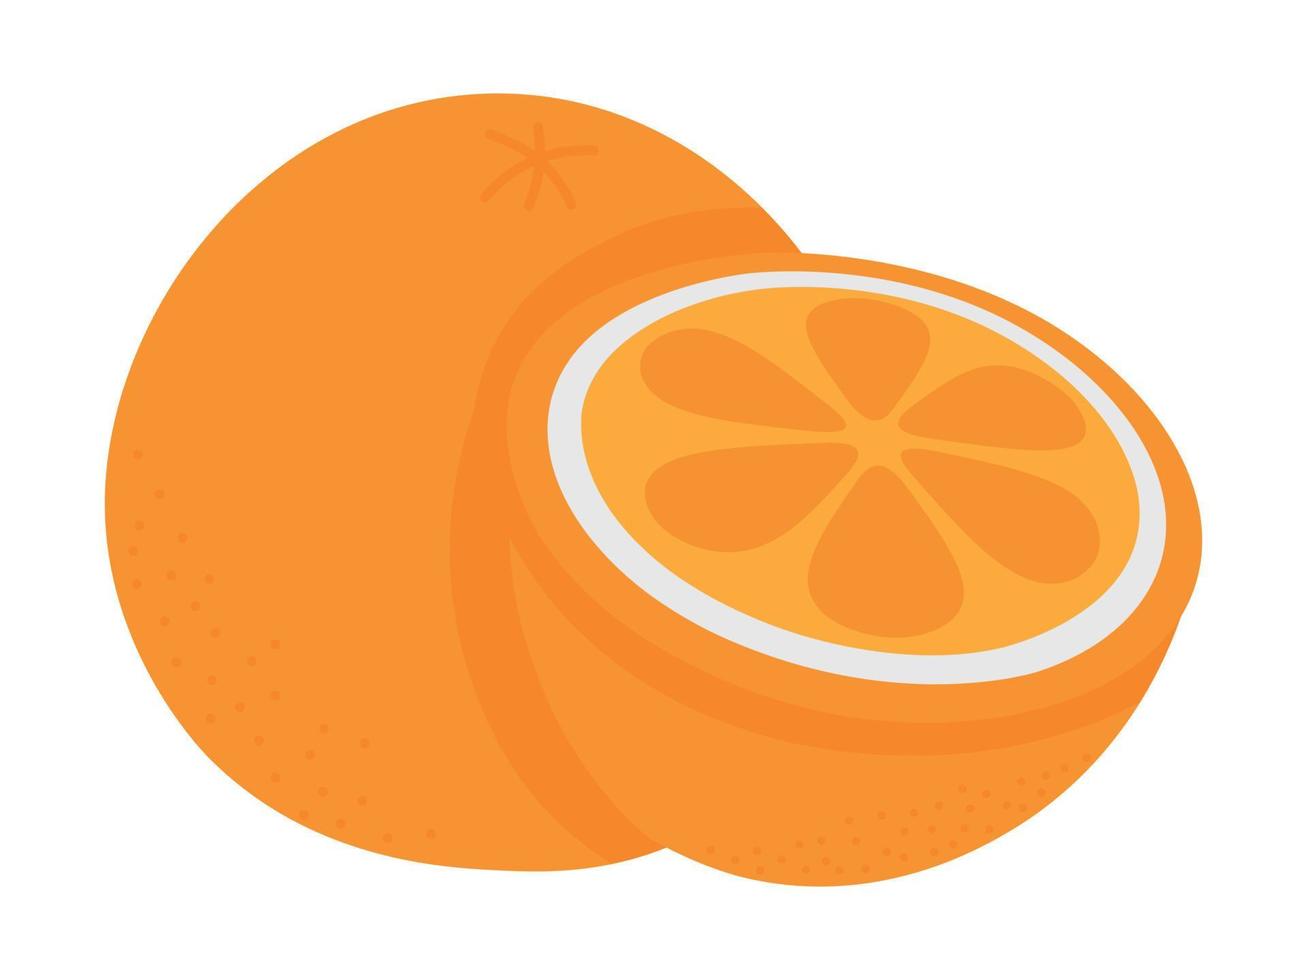 Simple vector orange. Flat doodle clipart. All objects are repainted.